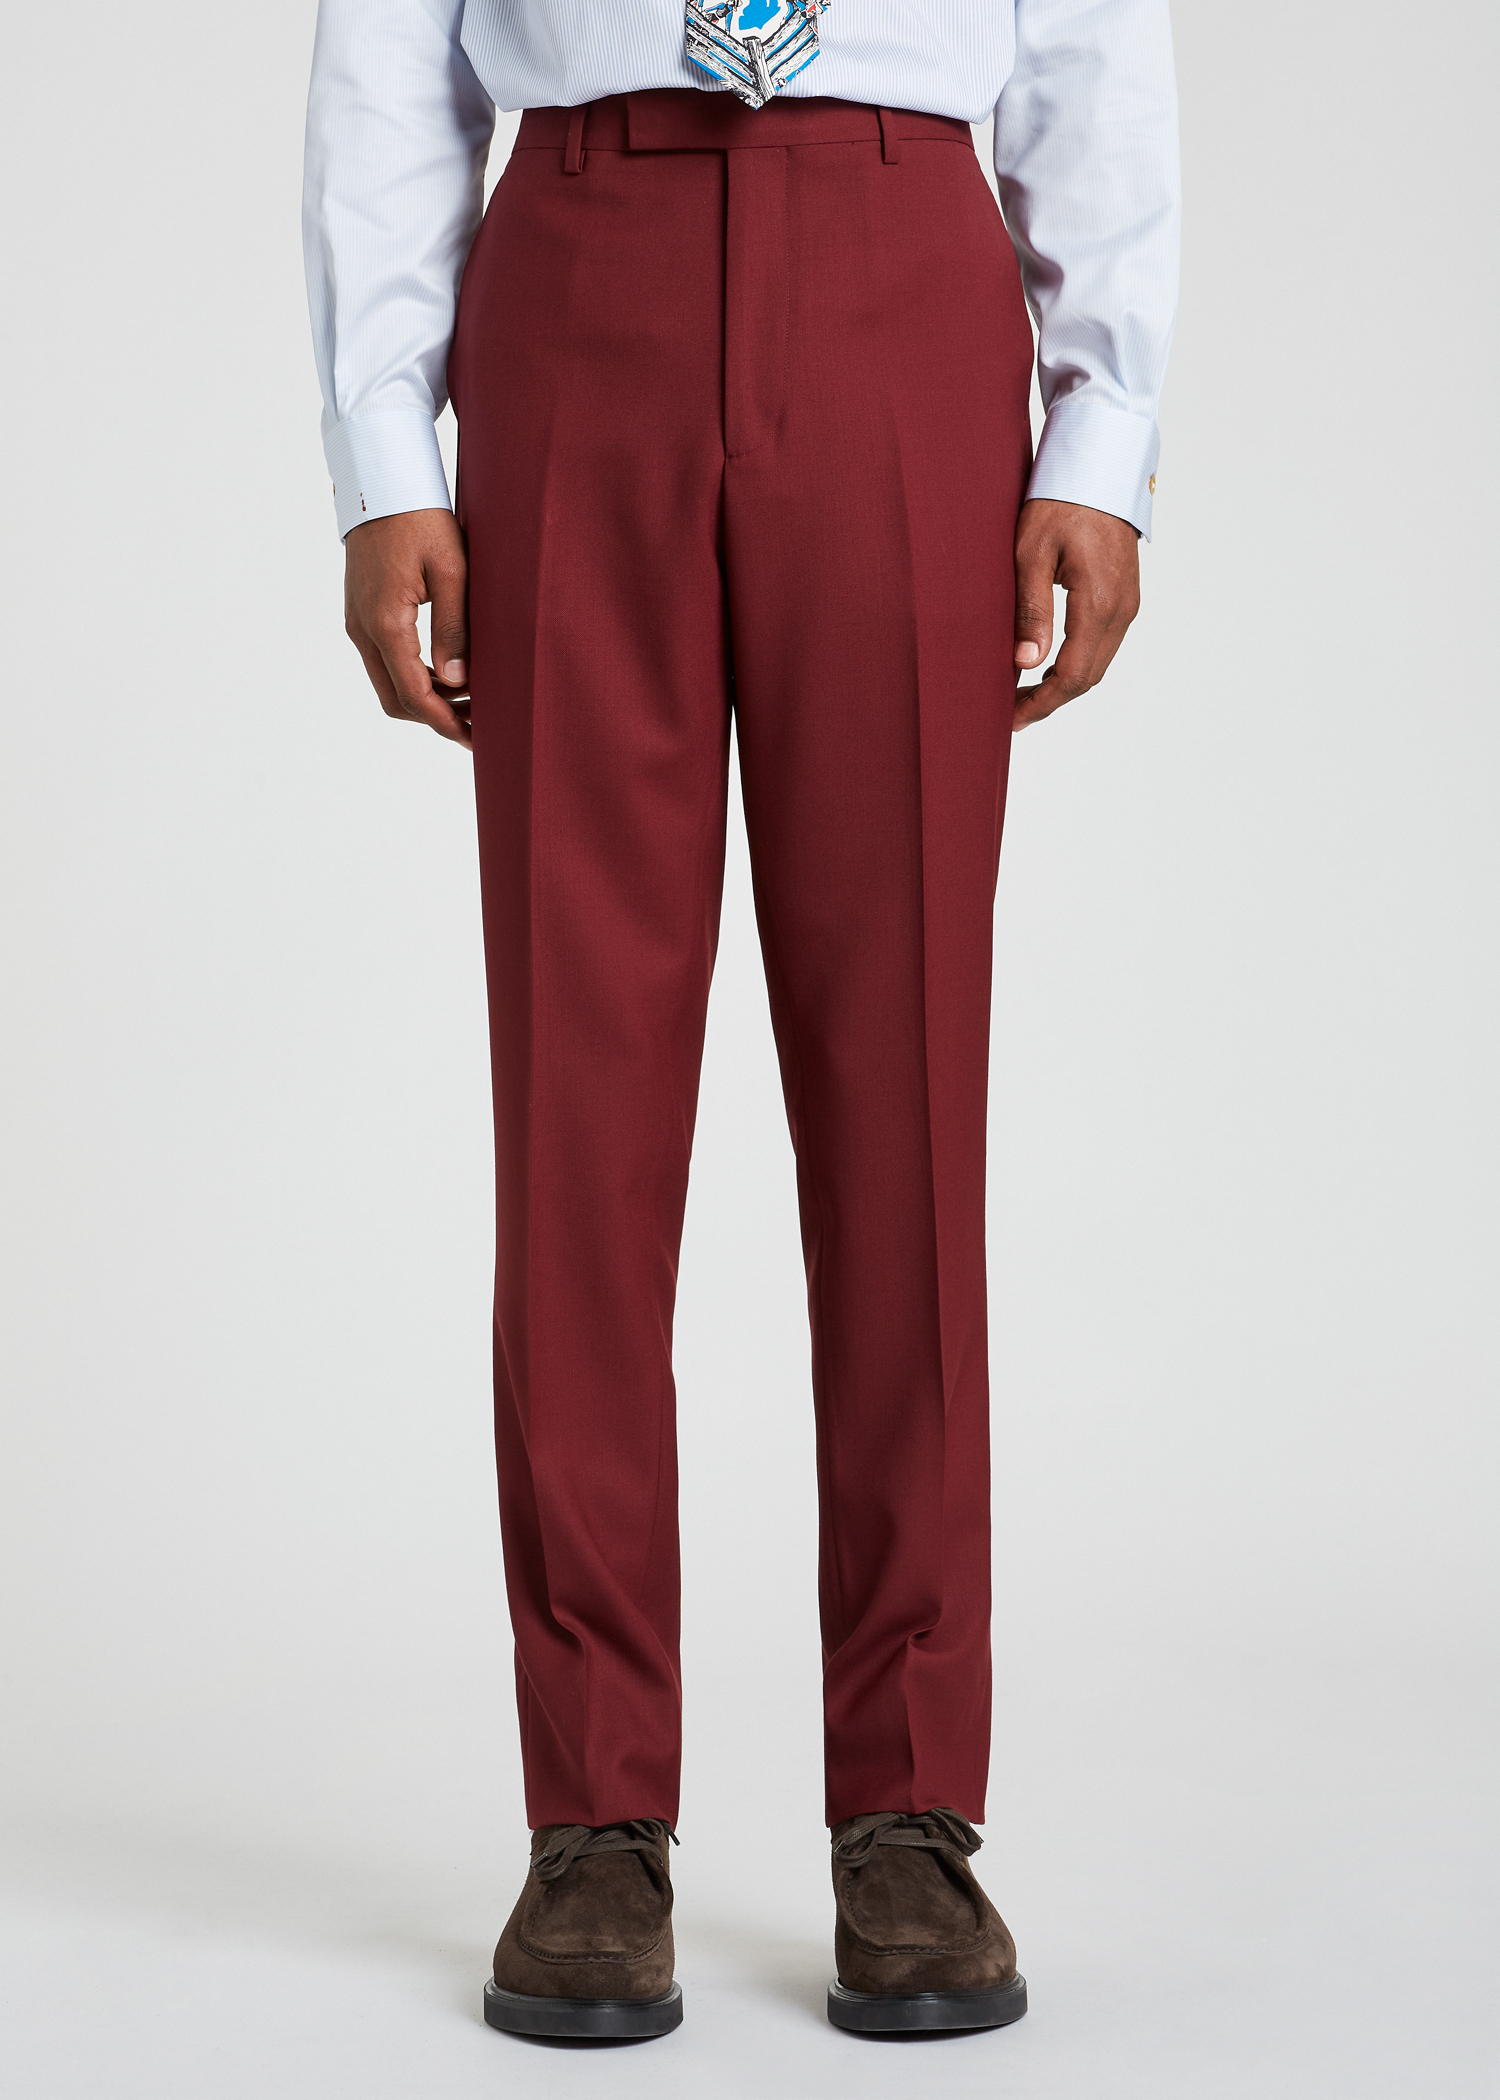 Model trouser front view - A Suit To Travel In - Men's Cherry Red Wool Suit Paul Smith